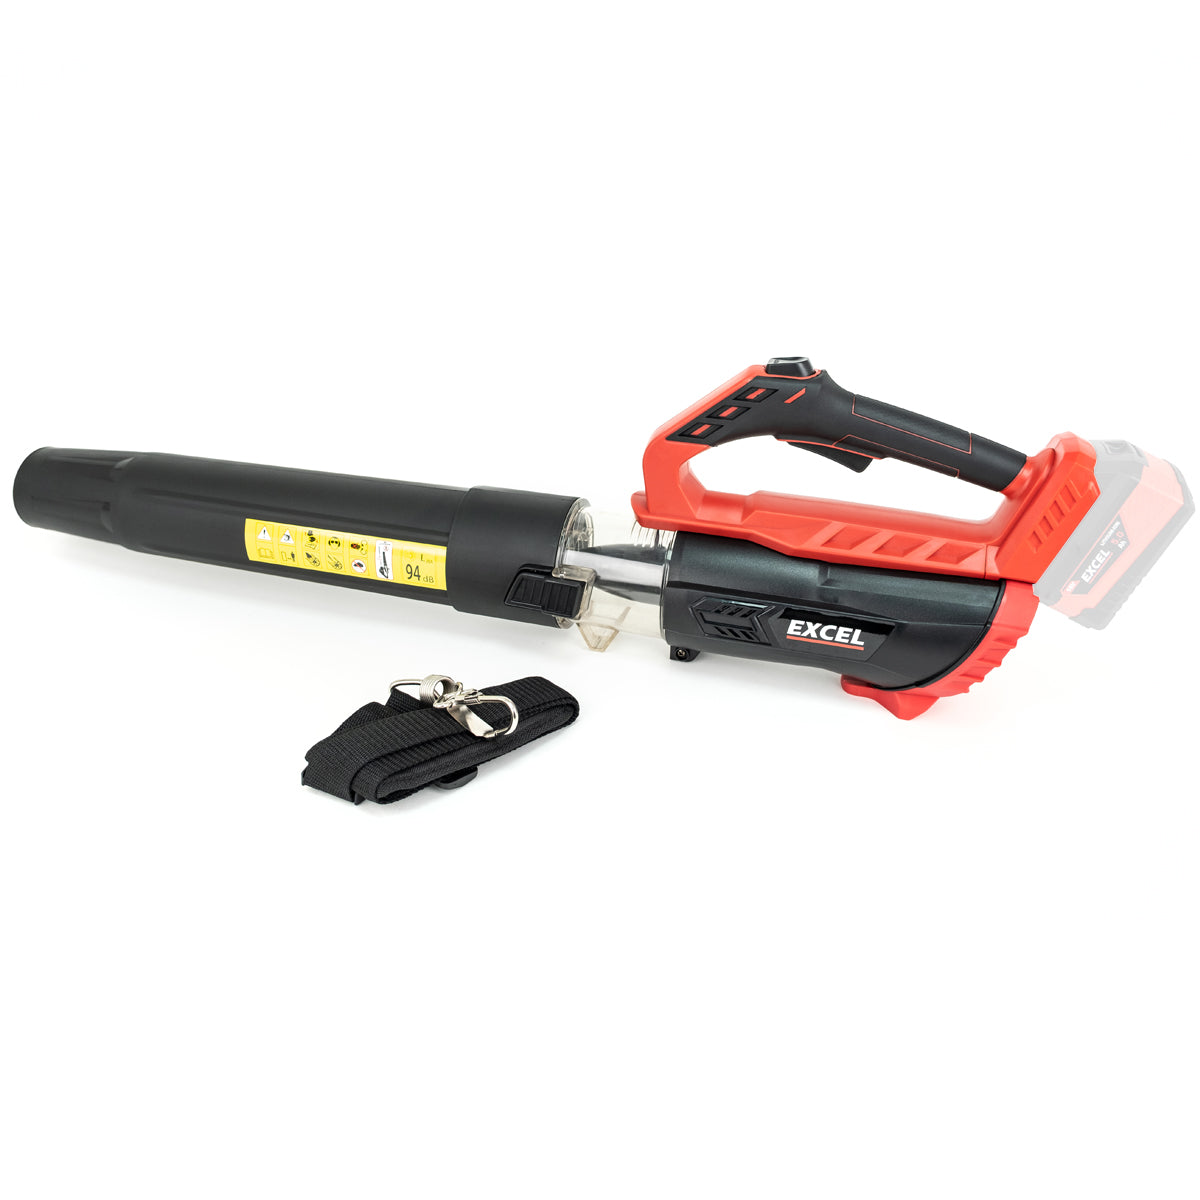 Excel 18V Garden Leaf Blower 2 Level Speed with 2 x 5.0Ah Battery & Charger